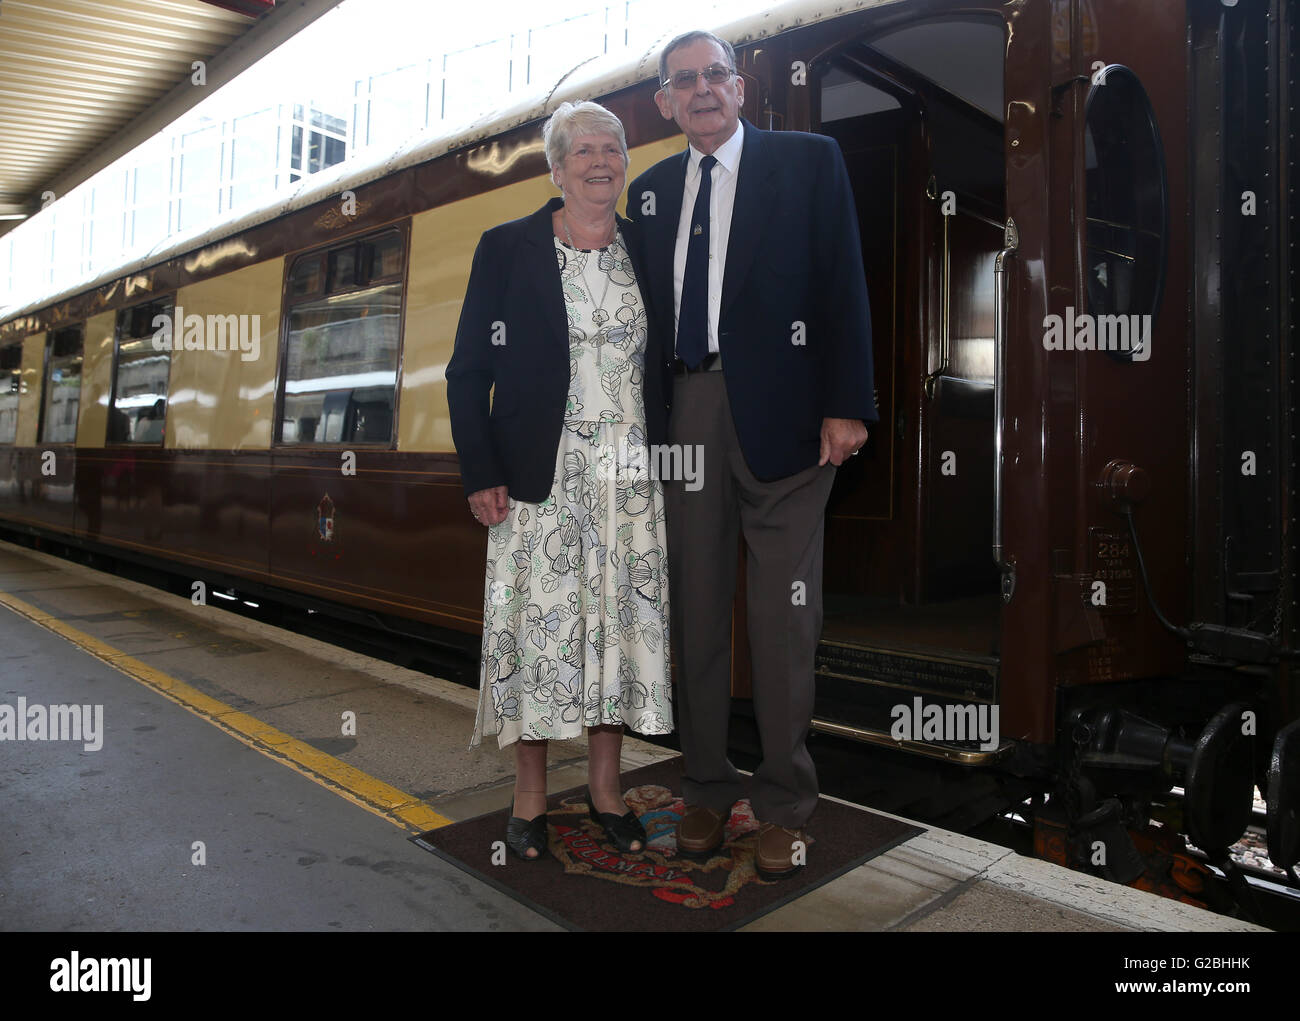 Belmond british pullman train hi-res stock photography and images - Alamy